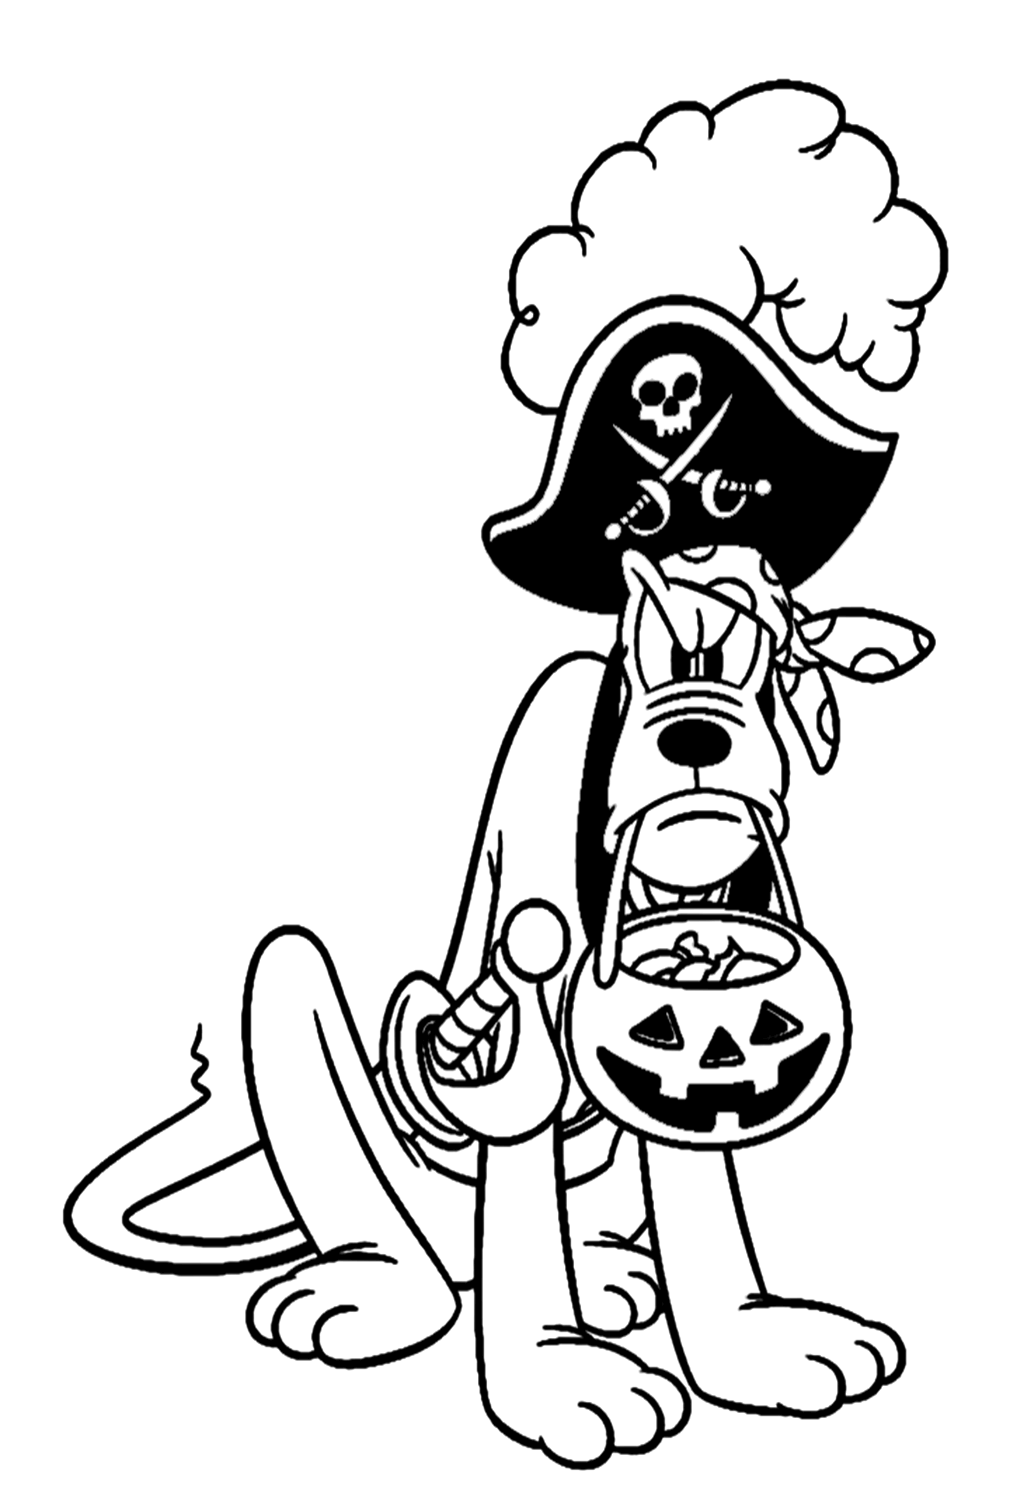 Pirate Pluto On Hallween Coloring Page